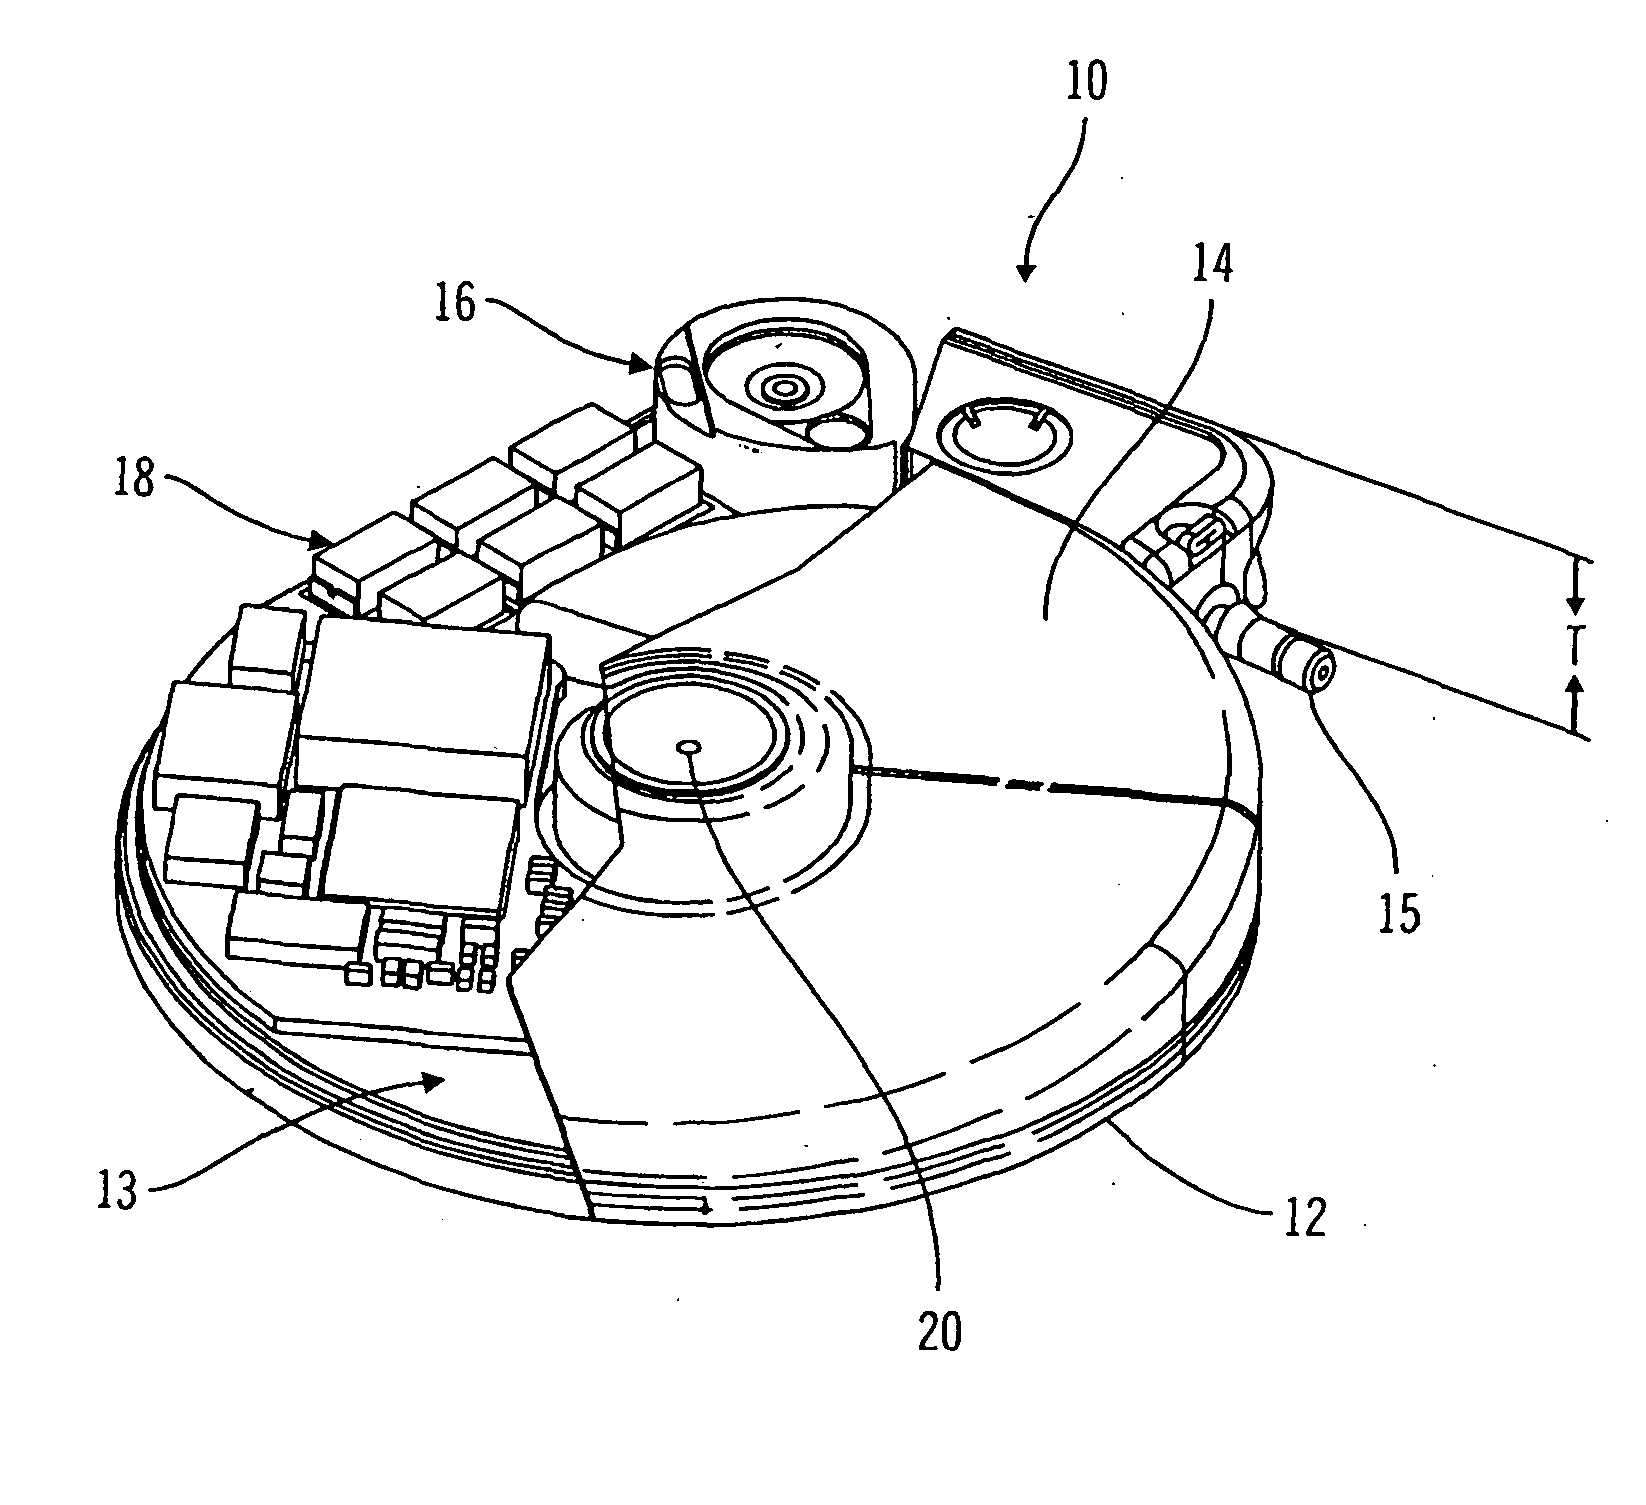 Infusion device and driving mechanism for same